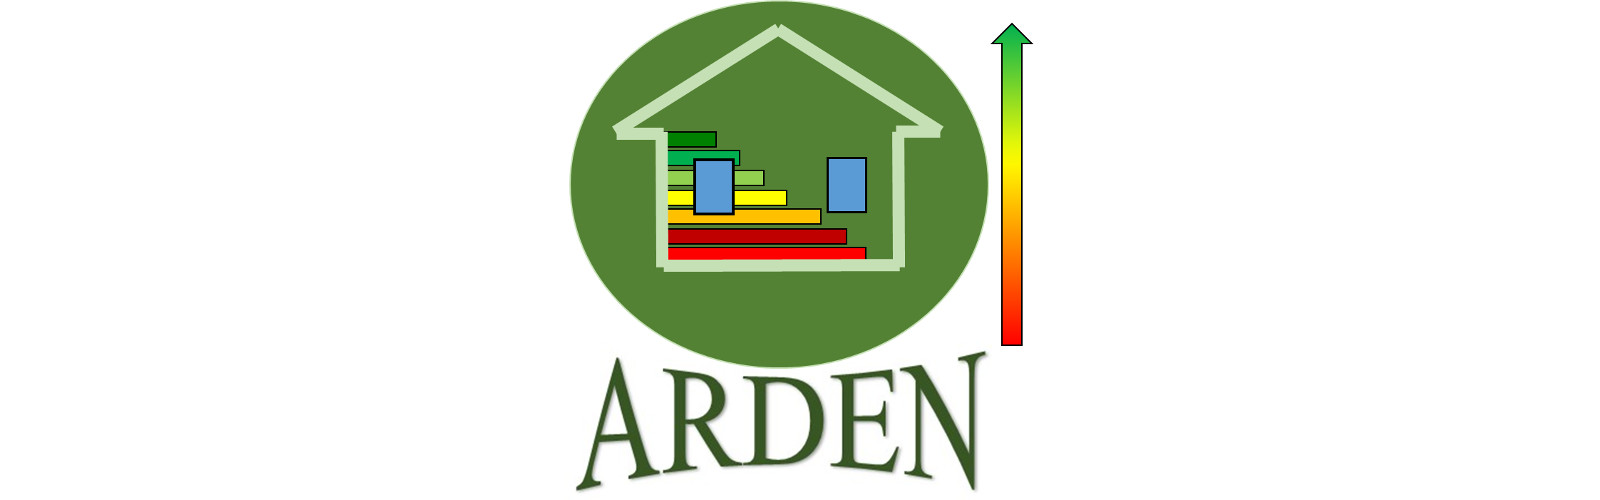 Arden Project